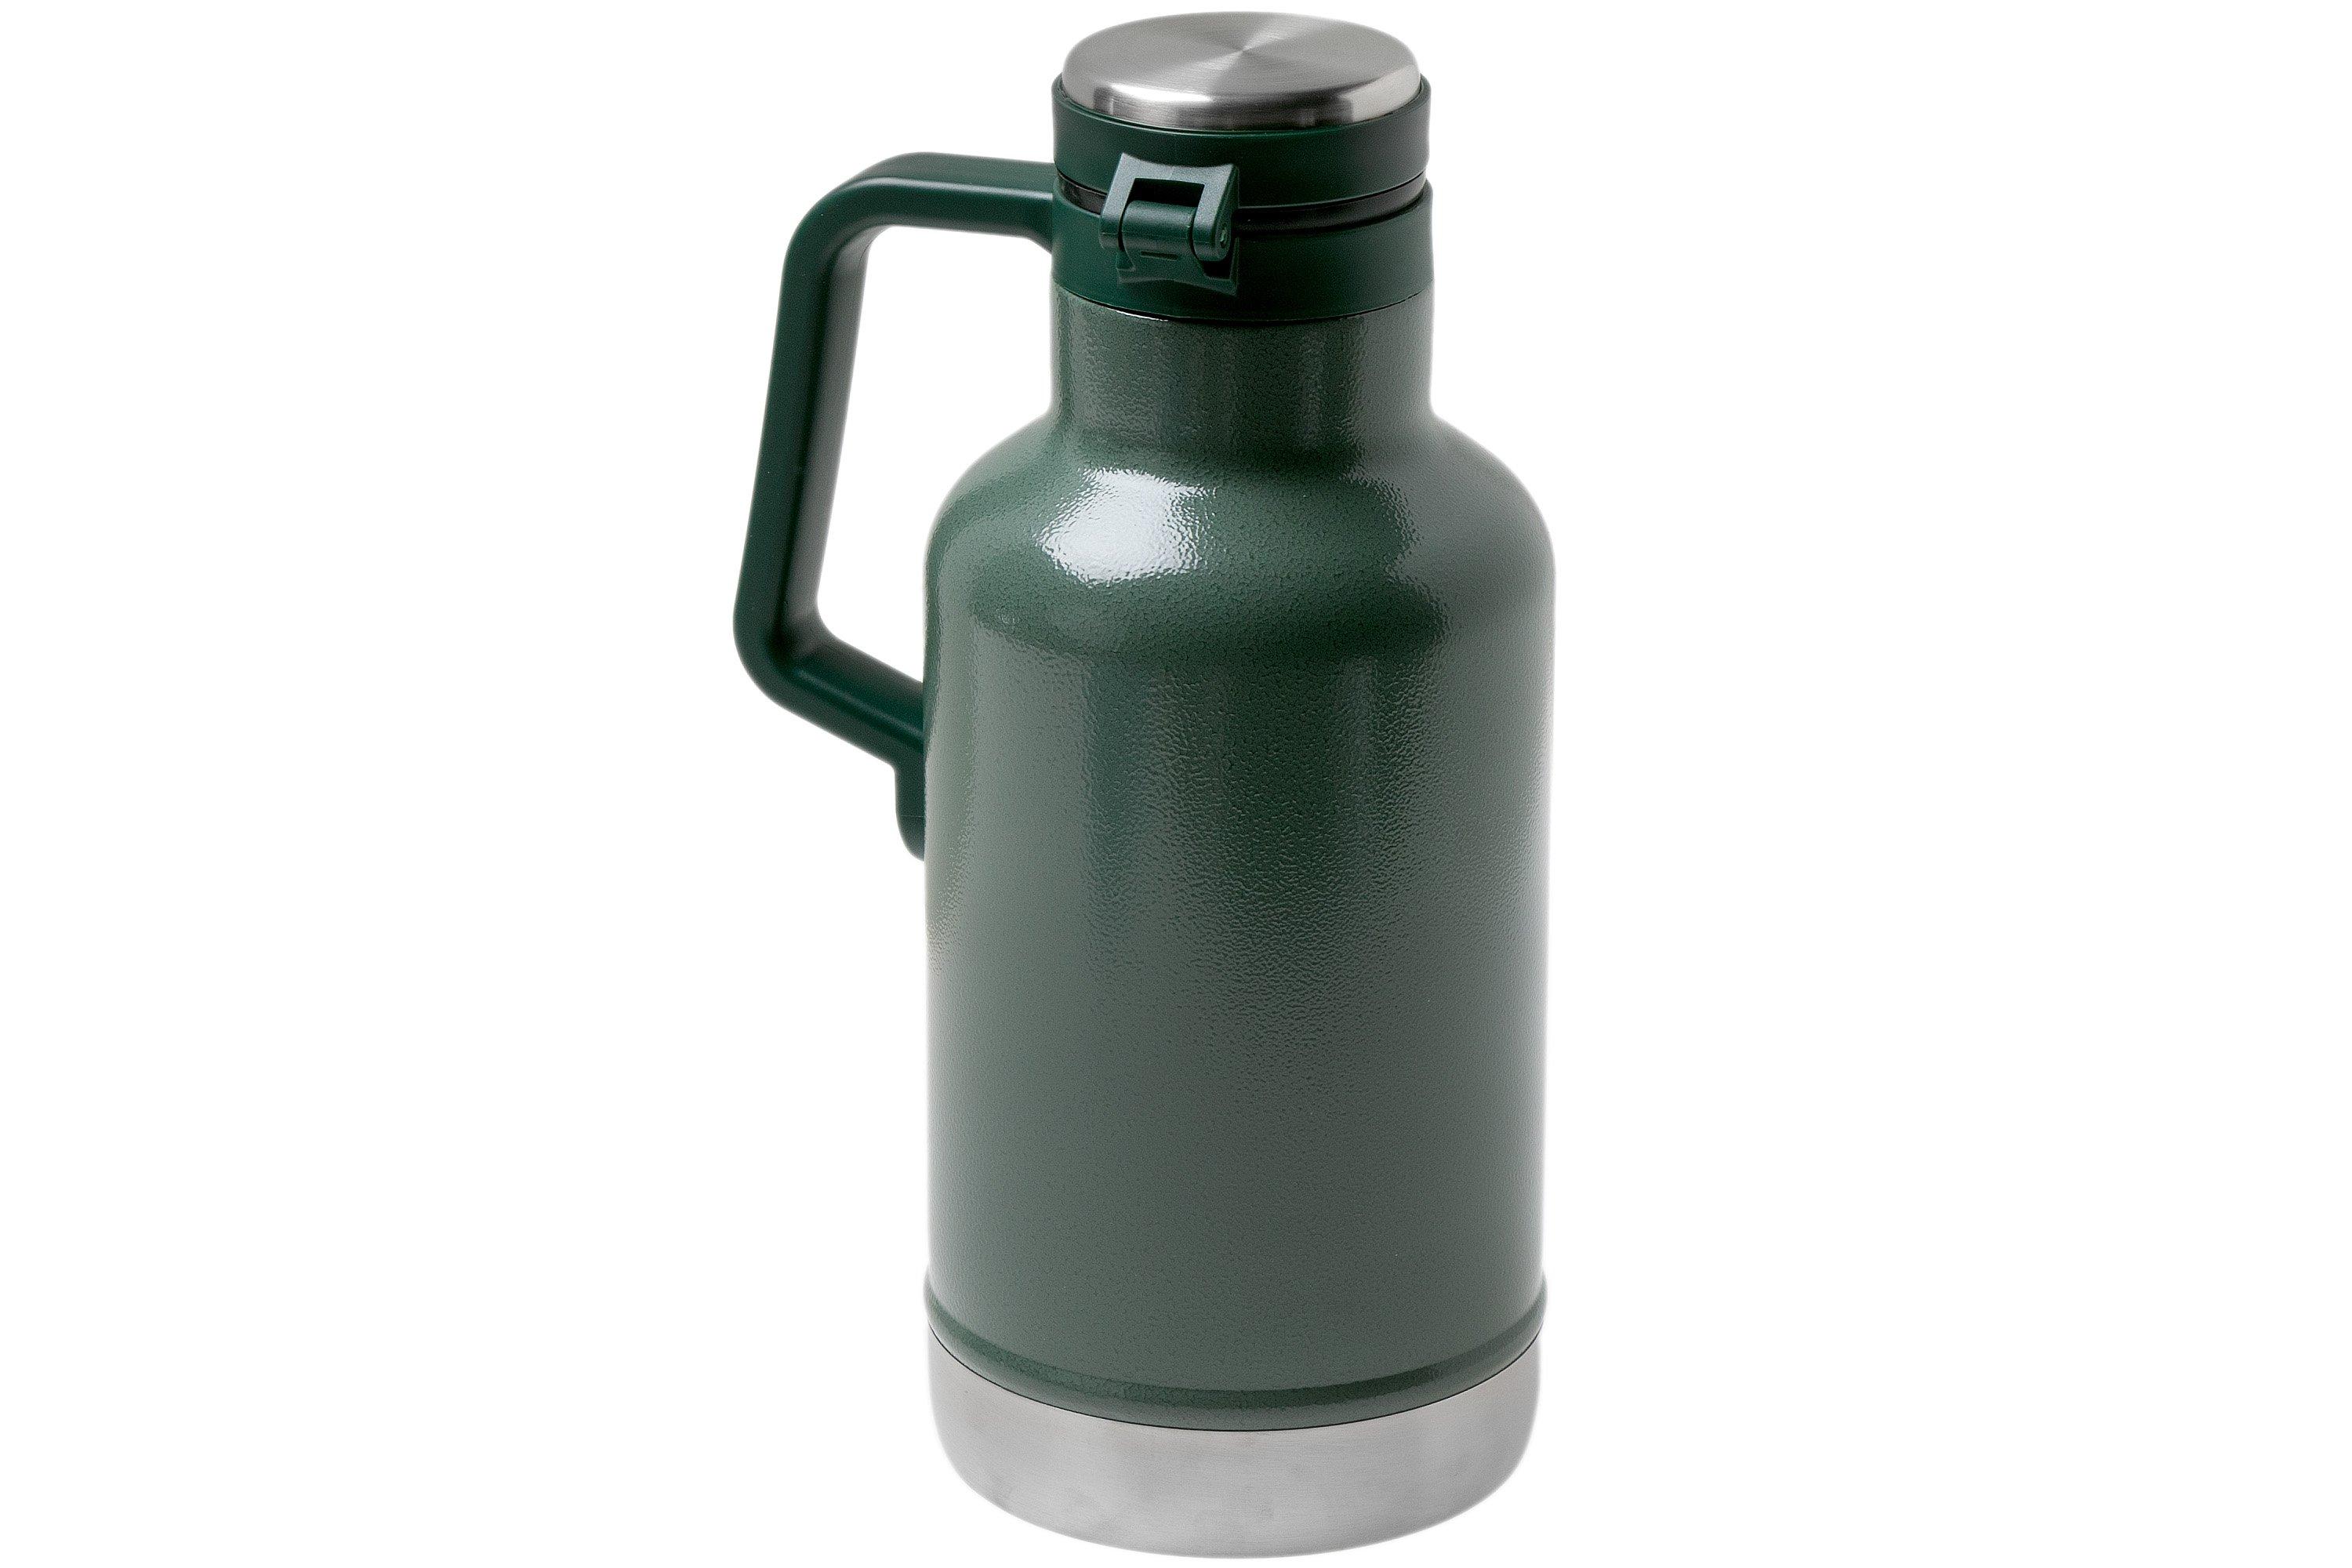 Stanley The Legendary Classic Thermos 1900 ml - Hammertone Green